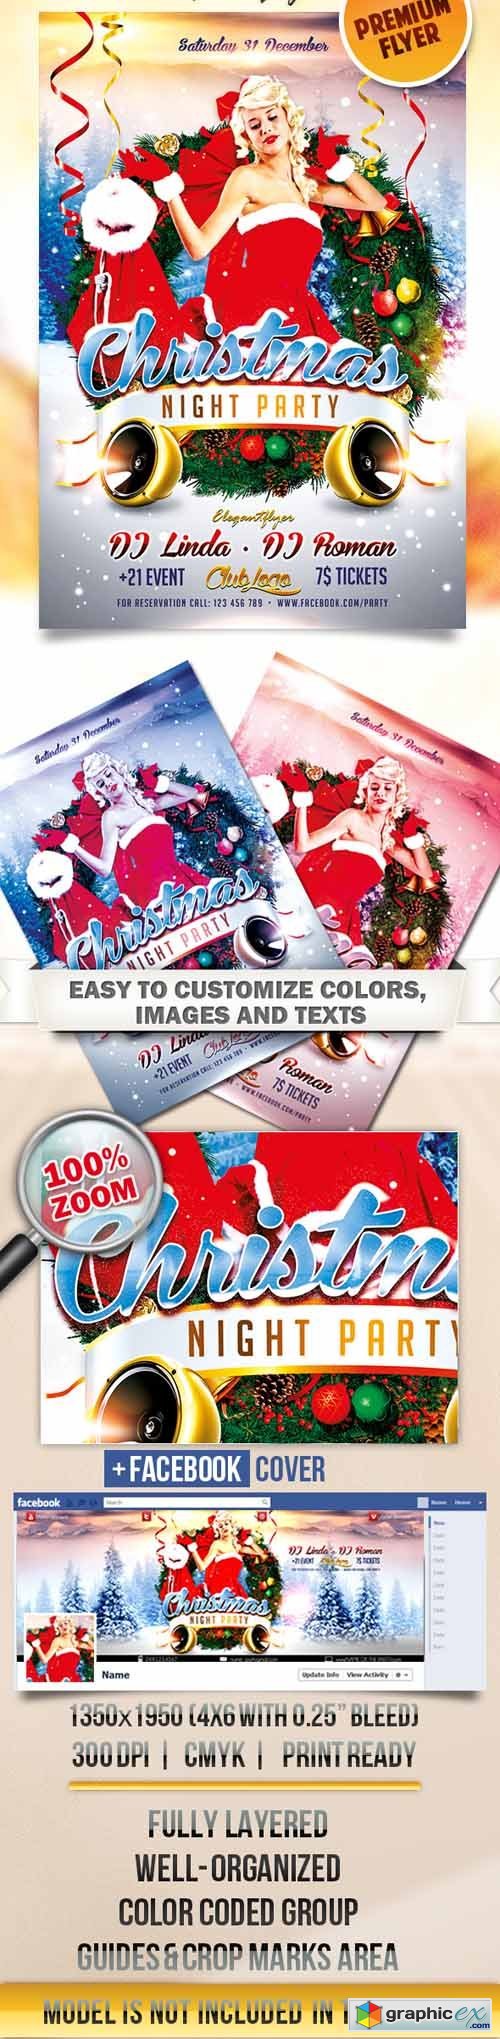 Christmas Night Party � Flyer PSD Template + Facebook Cover